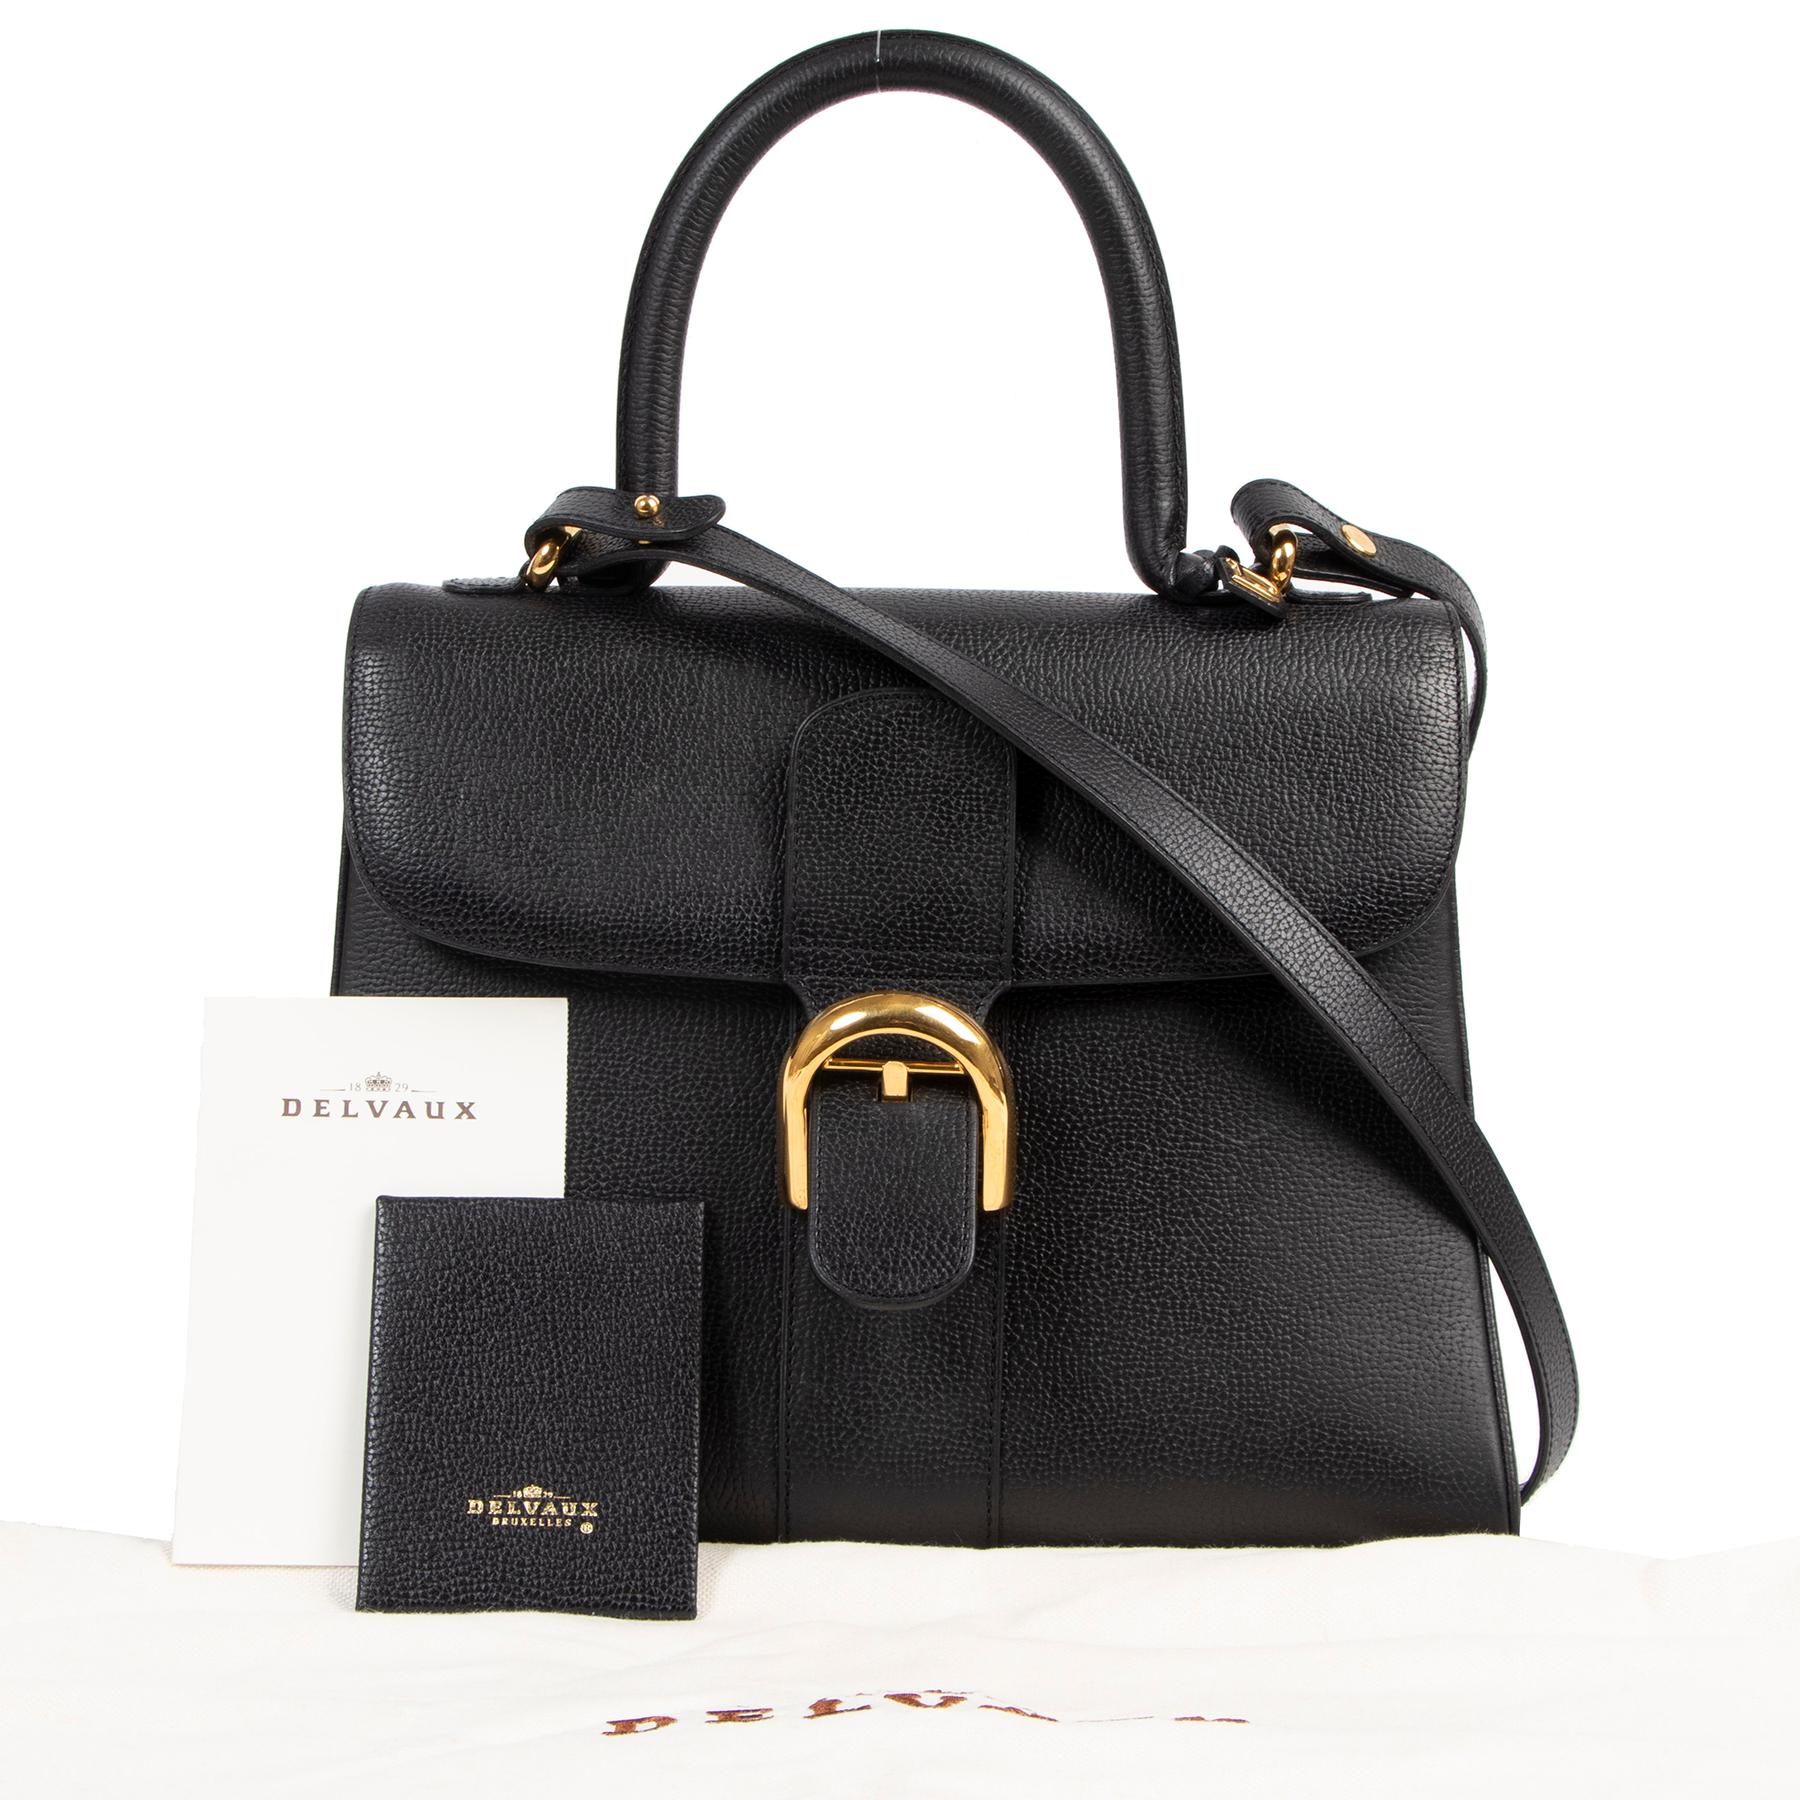 Insert some Belgian heritage into your wardrobe with this stunning Delvaux Brillant bag. This gorgeous top handle bag is a timeless classic that will never go out of style due to its sleek shape and versatile color. This Brillant bag comes in black